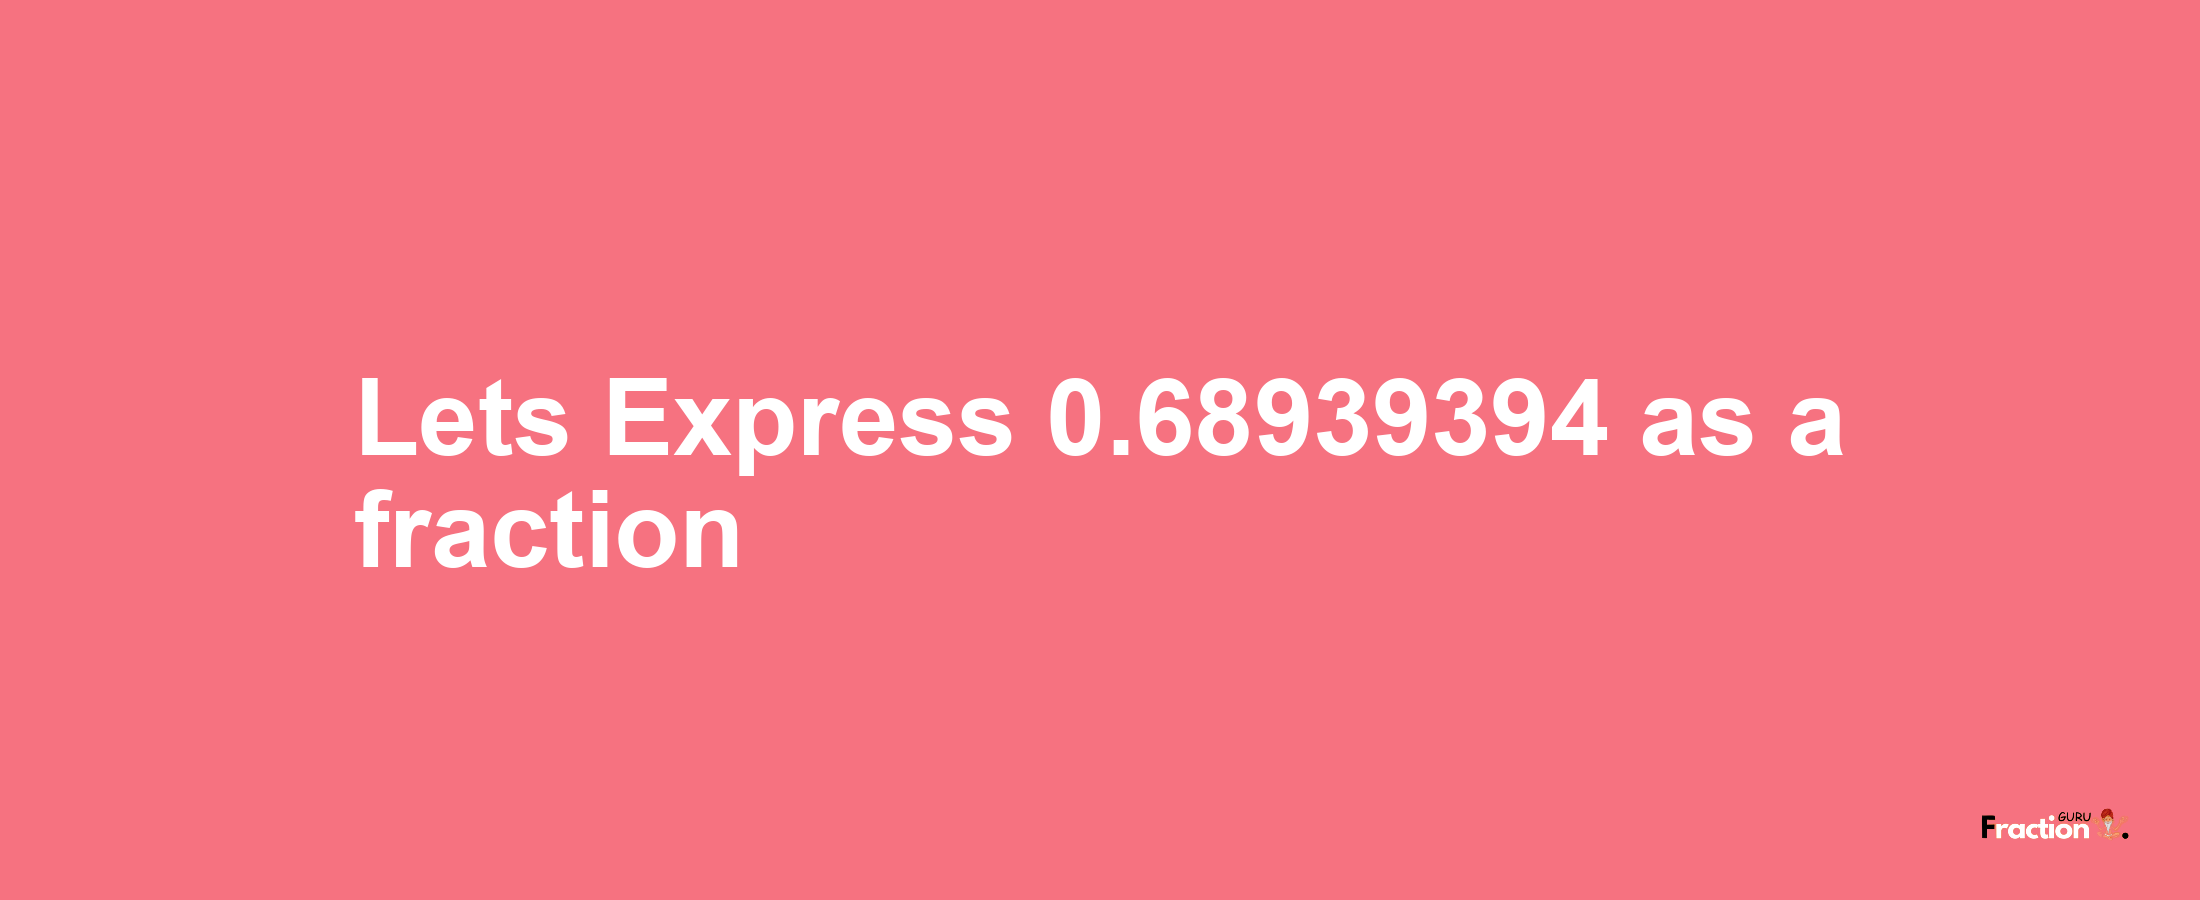 Lets Express 0.68939394 as afraction